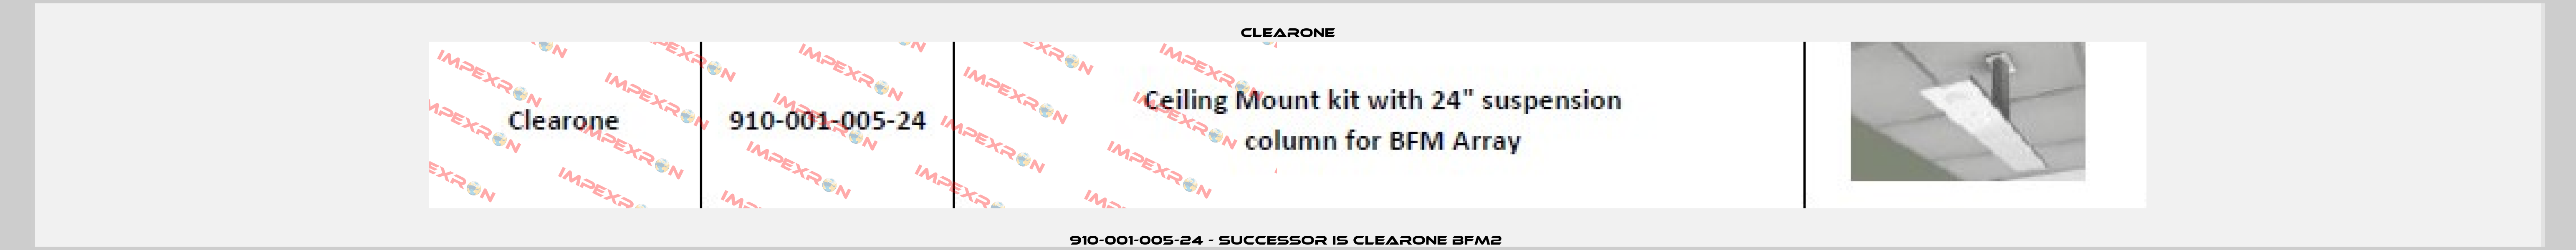 910-001-005-24 - successor is ClearOne BFM2  Clearone